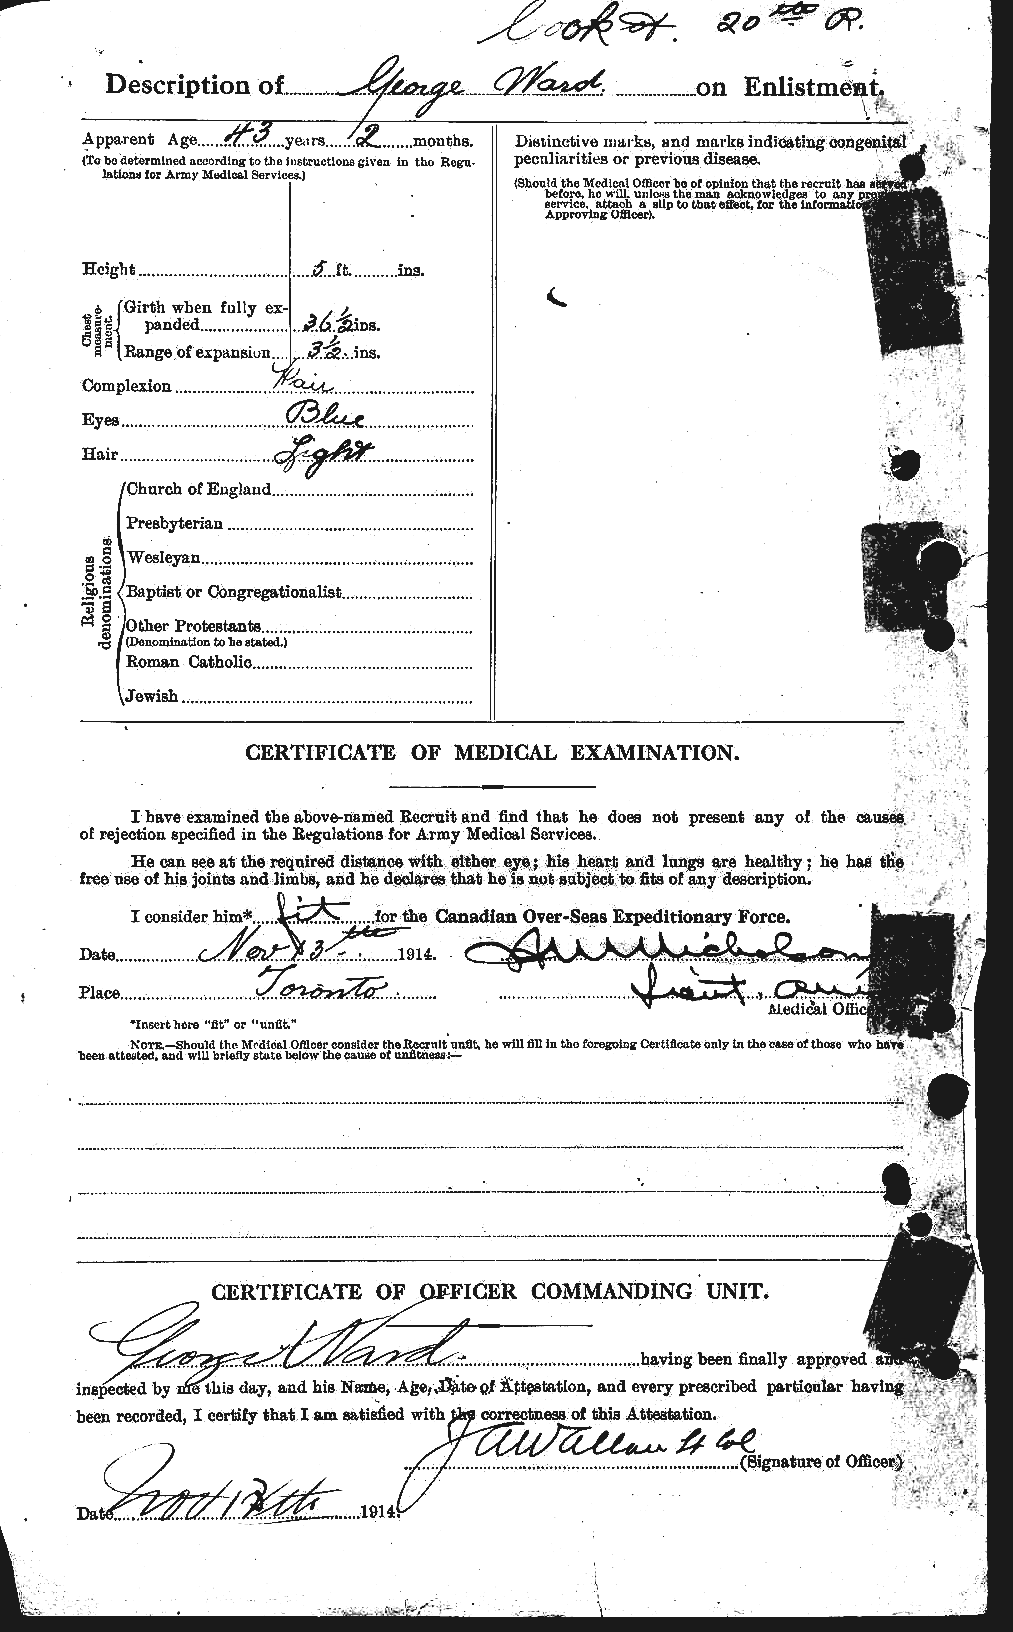 Personnel Records of the First World War - CEF 657738b